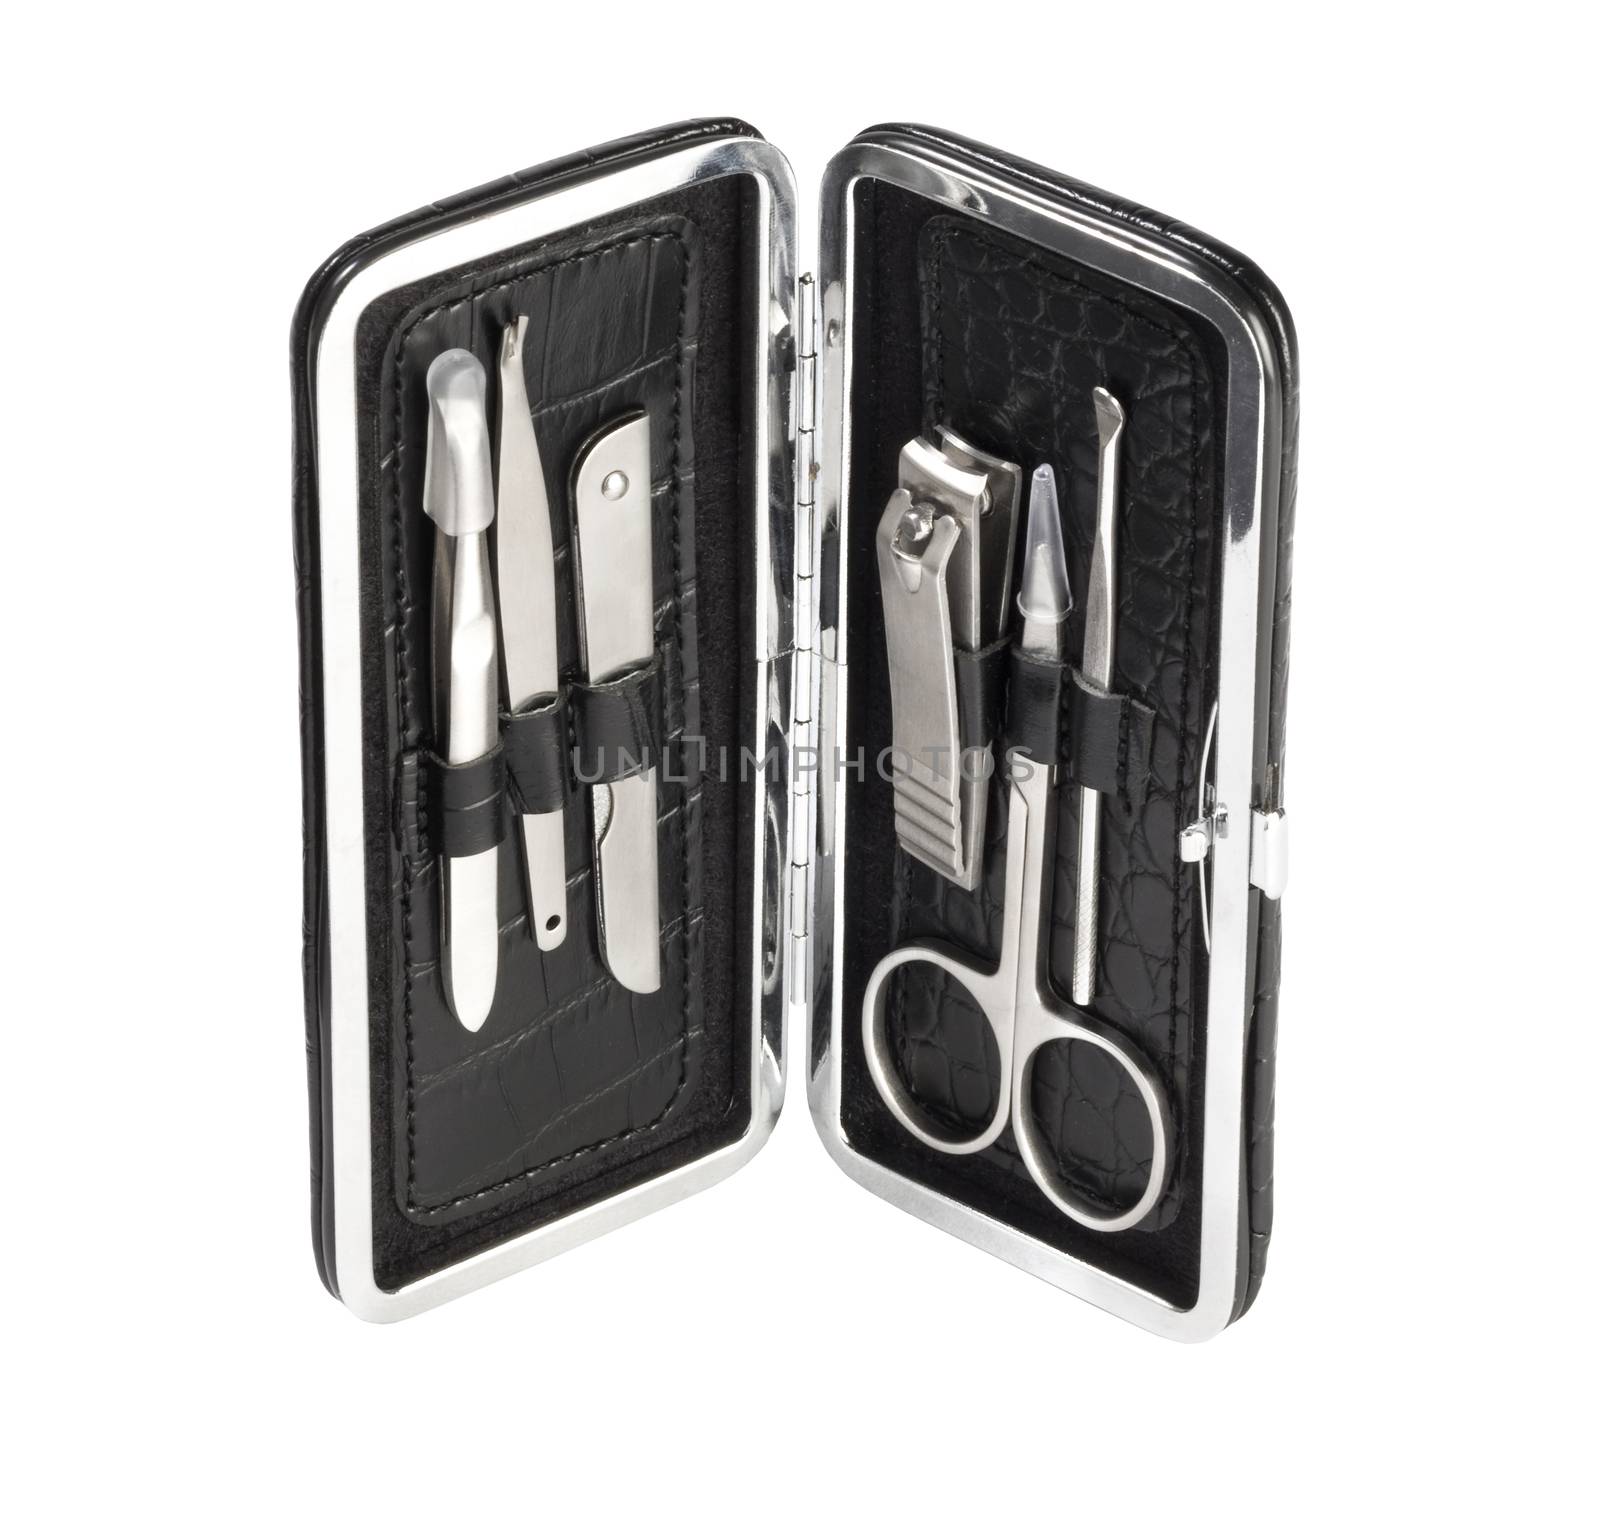 Cosmetics and accessories for manicure or pedicure, nail file, nail polish and remover, scissors, nail clippers, concept of nail care
